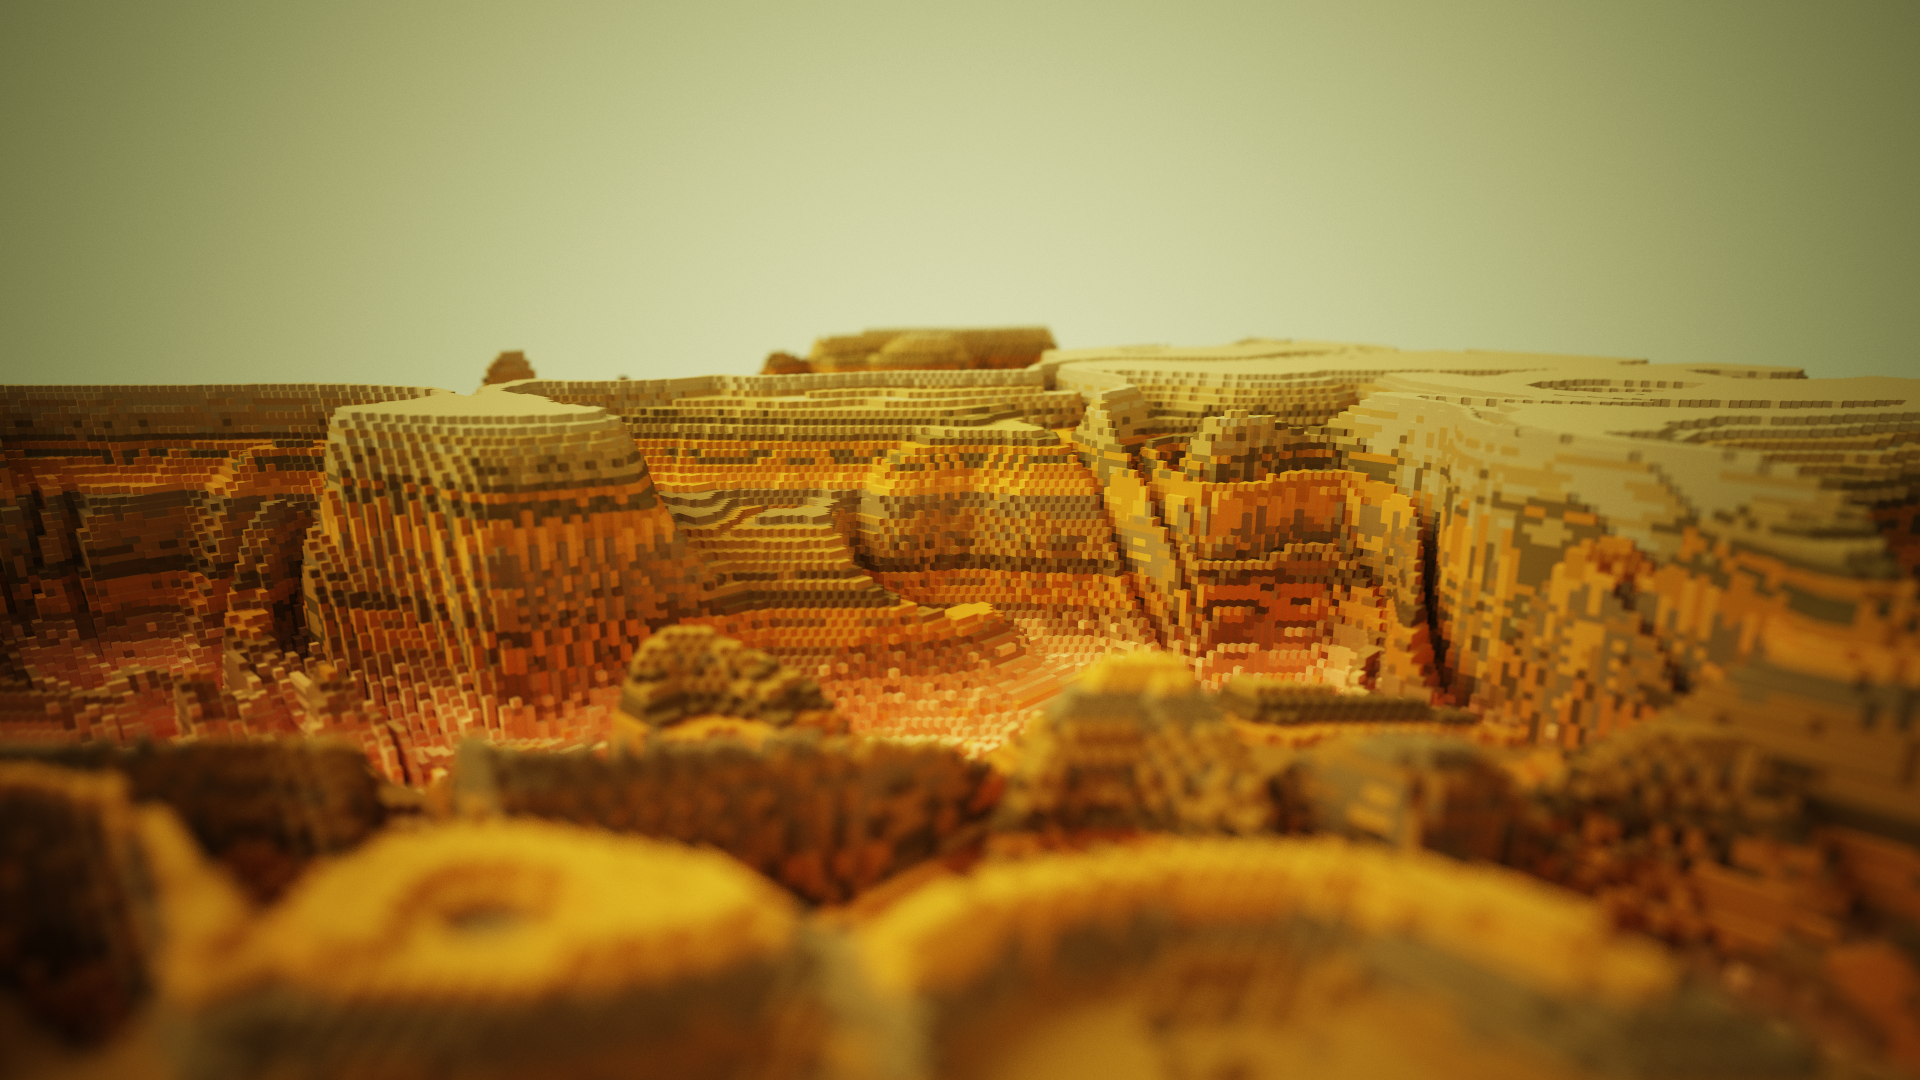 A voxel landscape of a alien desert planet. The surface is made of mountains and is red and orange